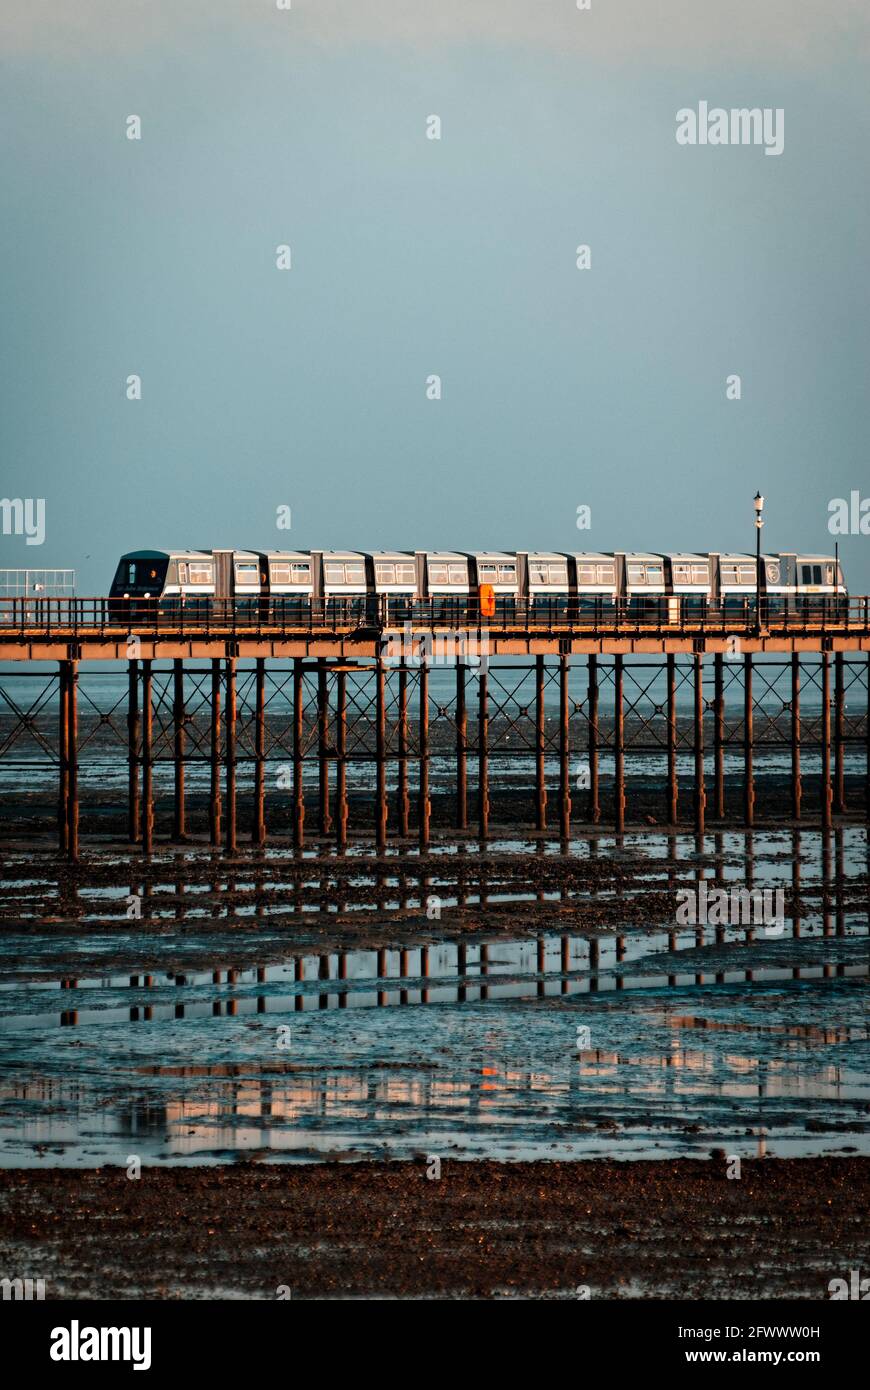 Southend Pier, The longest pier in the world at 1.34 miles or 2.16 km reaching out into the Thames Estuary, Southend-on-Sea, Essex, Britain Stock Photo